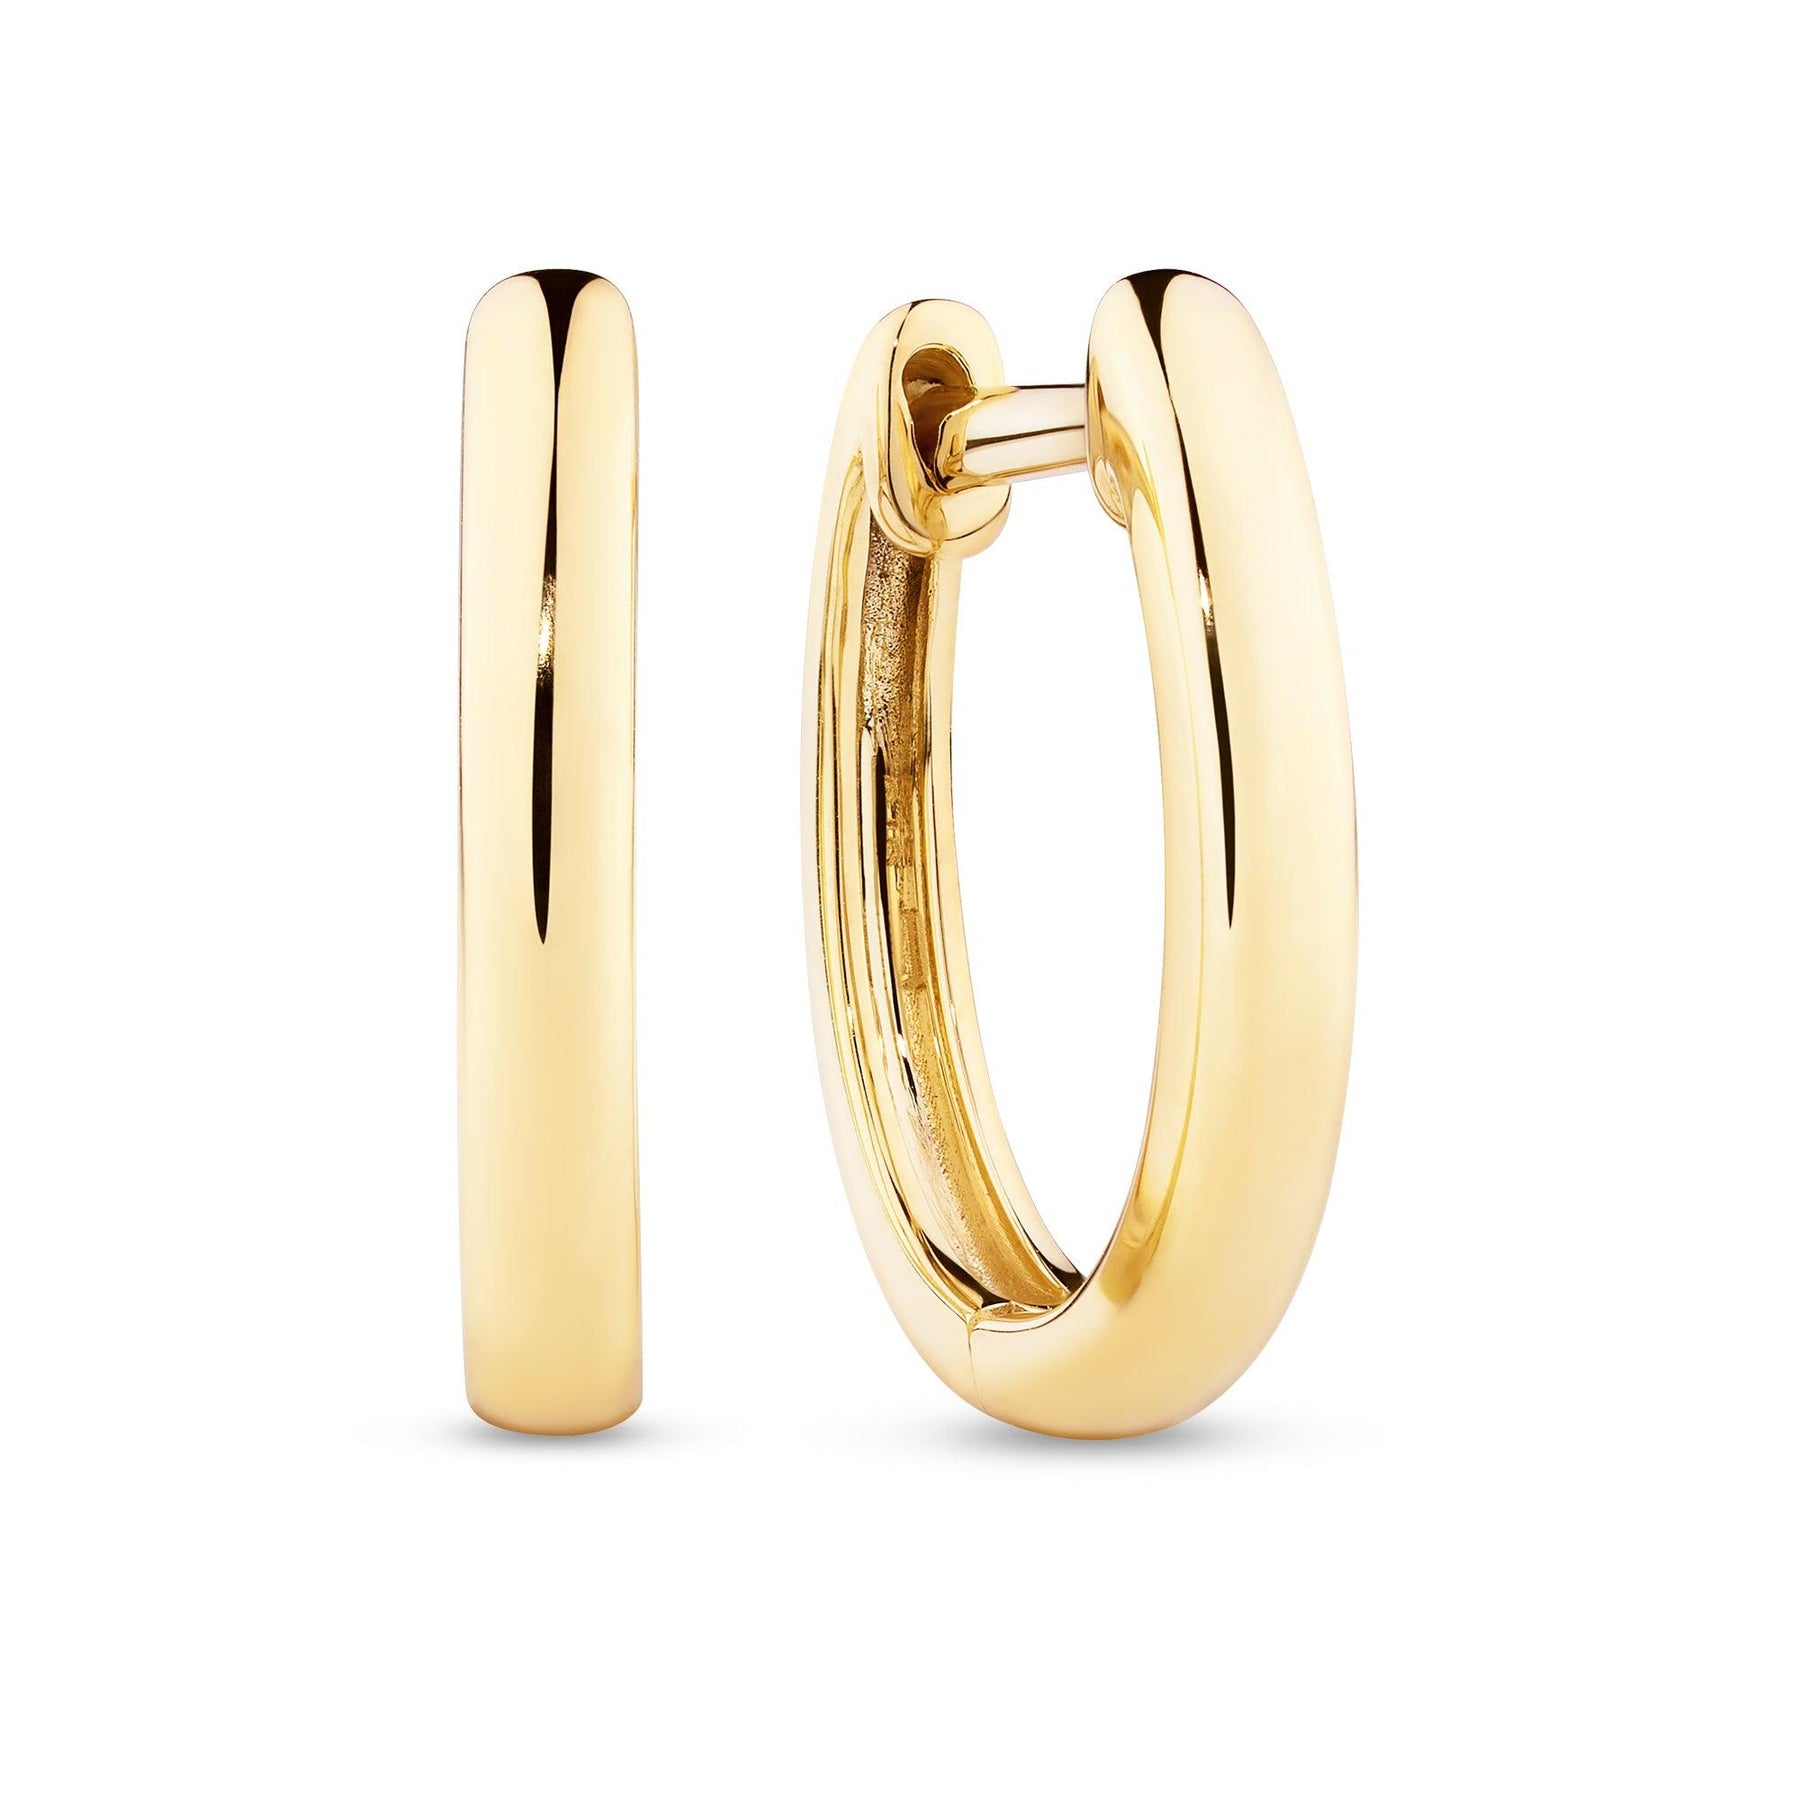 Oval Shaped Huggie Hoop Earrings in 9ct Yellow Gold - Wallace Bishop